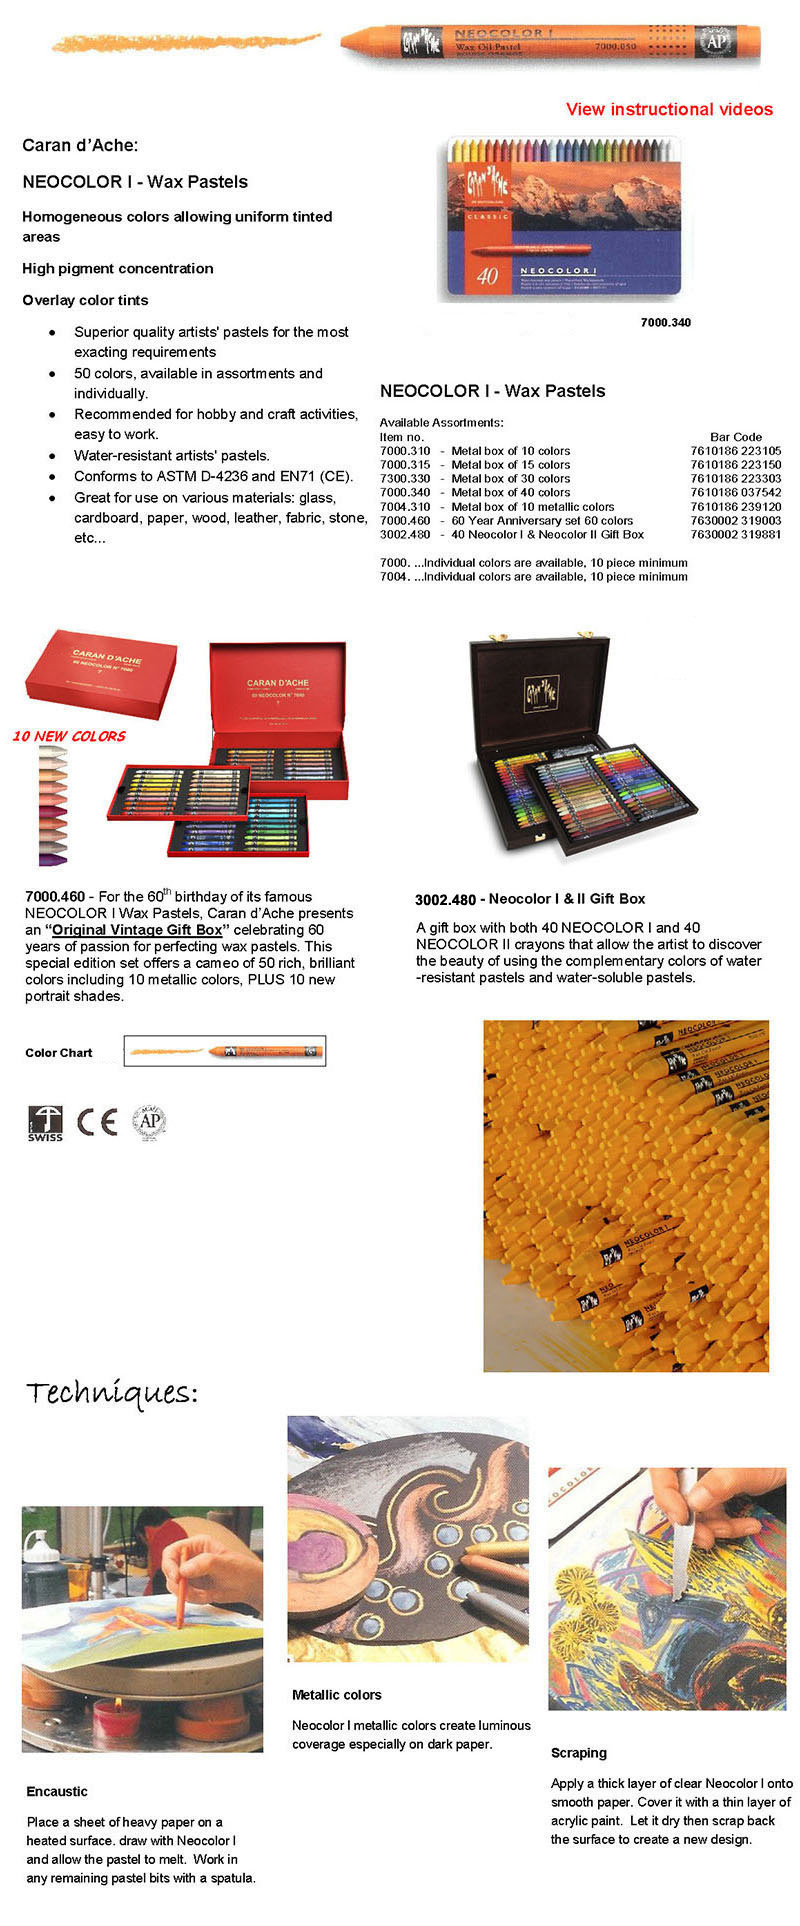 Creative Art Materials Supplies, Manufactures And Distributes